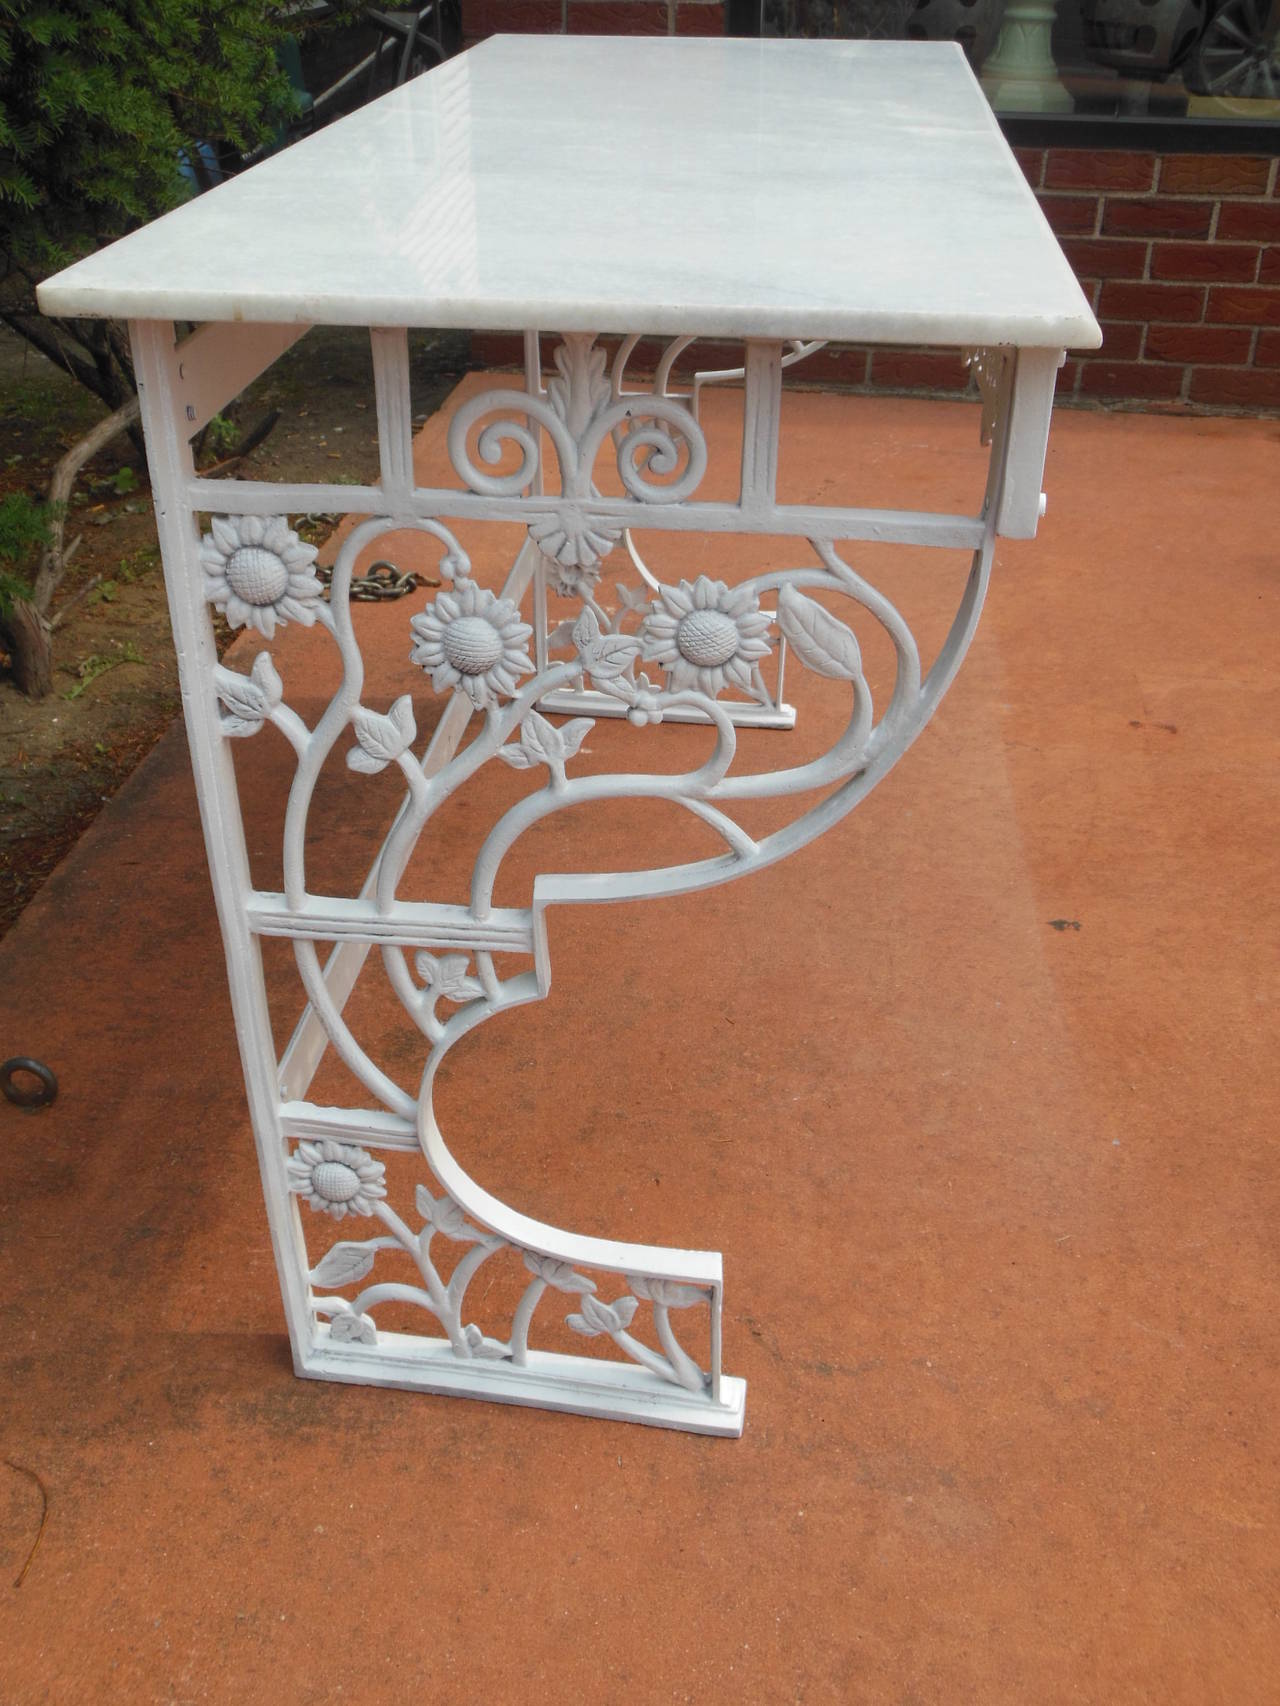 This is a marble-top cast iron console table in the aesthetic taste. The apron of the table is ablaze with pierce carved sunflower and pomegranate detail. The sides of the table decorated with more sunflowers.